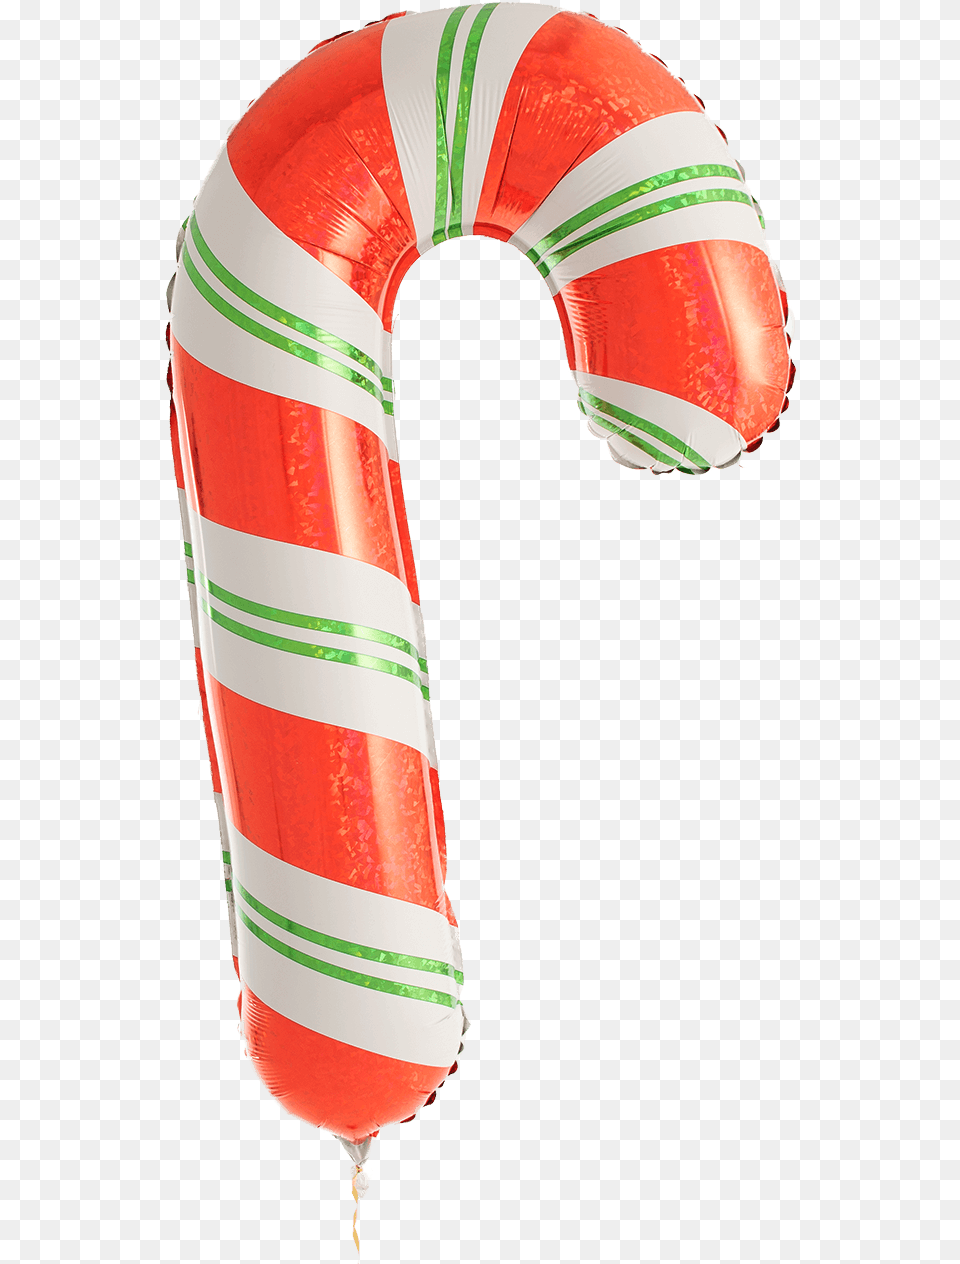 Peppermint Candy Cane Helium Filled Balloon Stick Candy, Food, Sweets Png Image